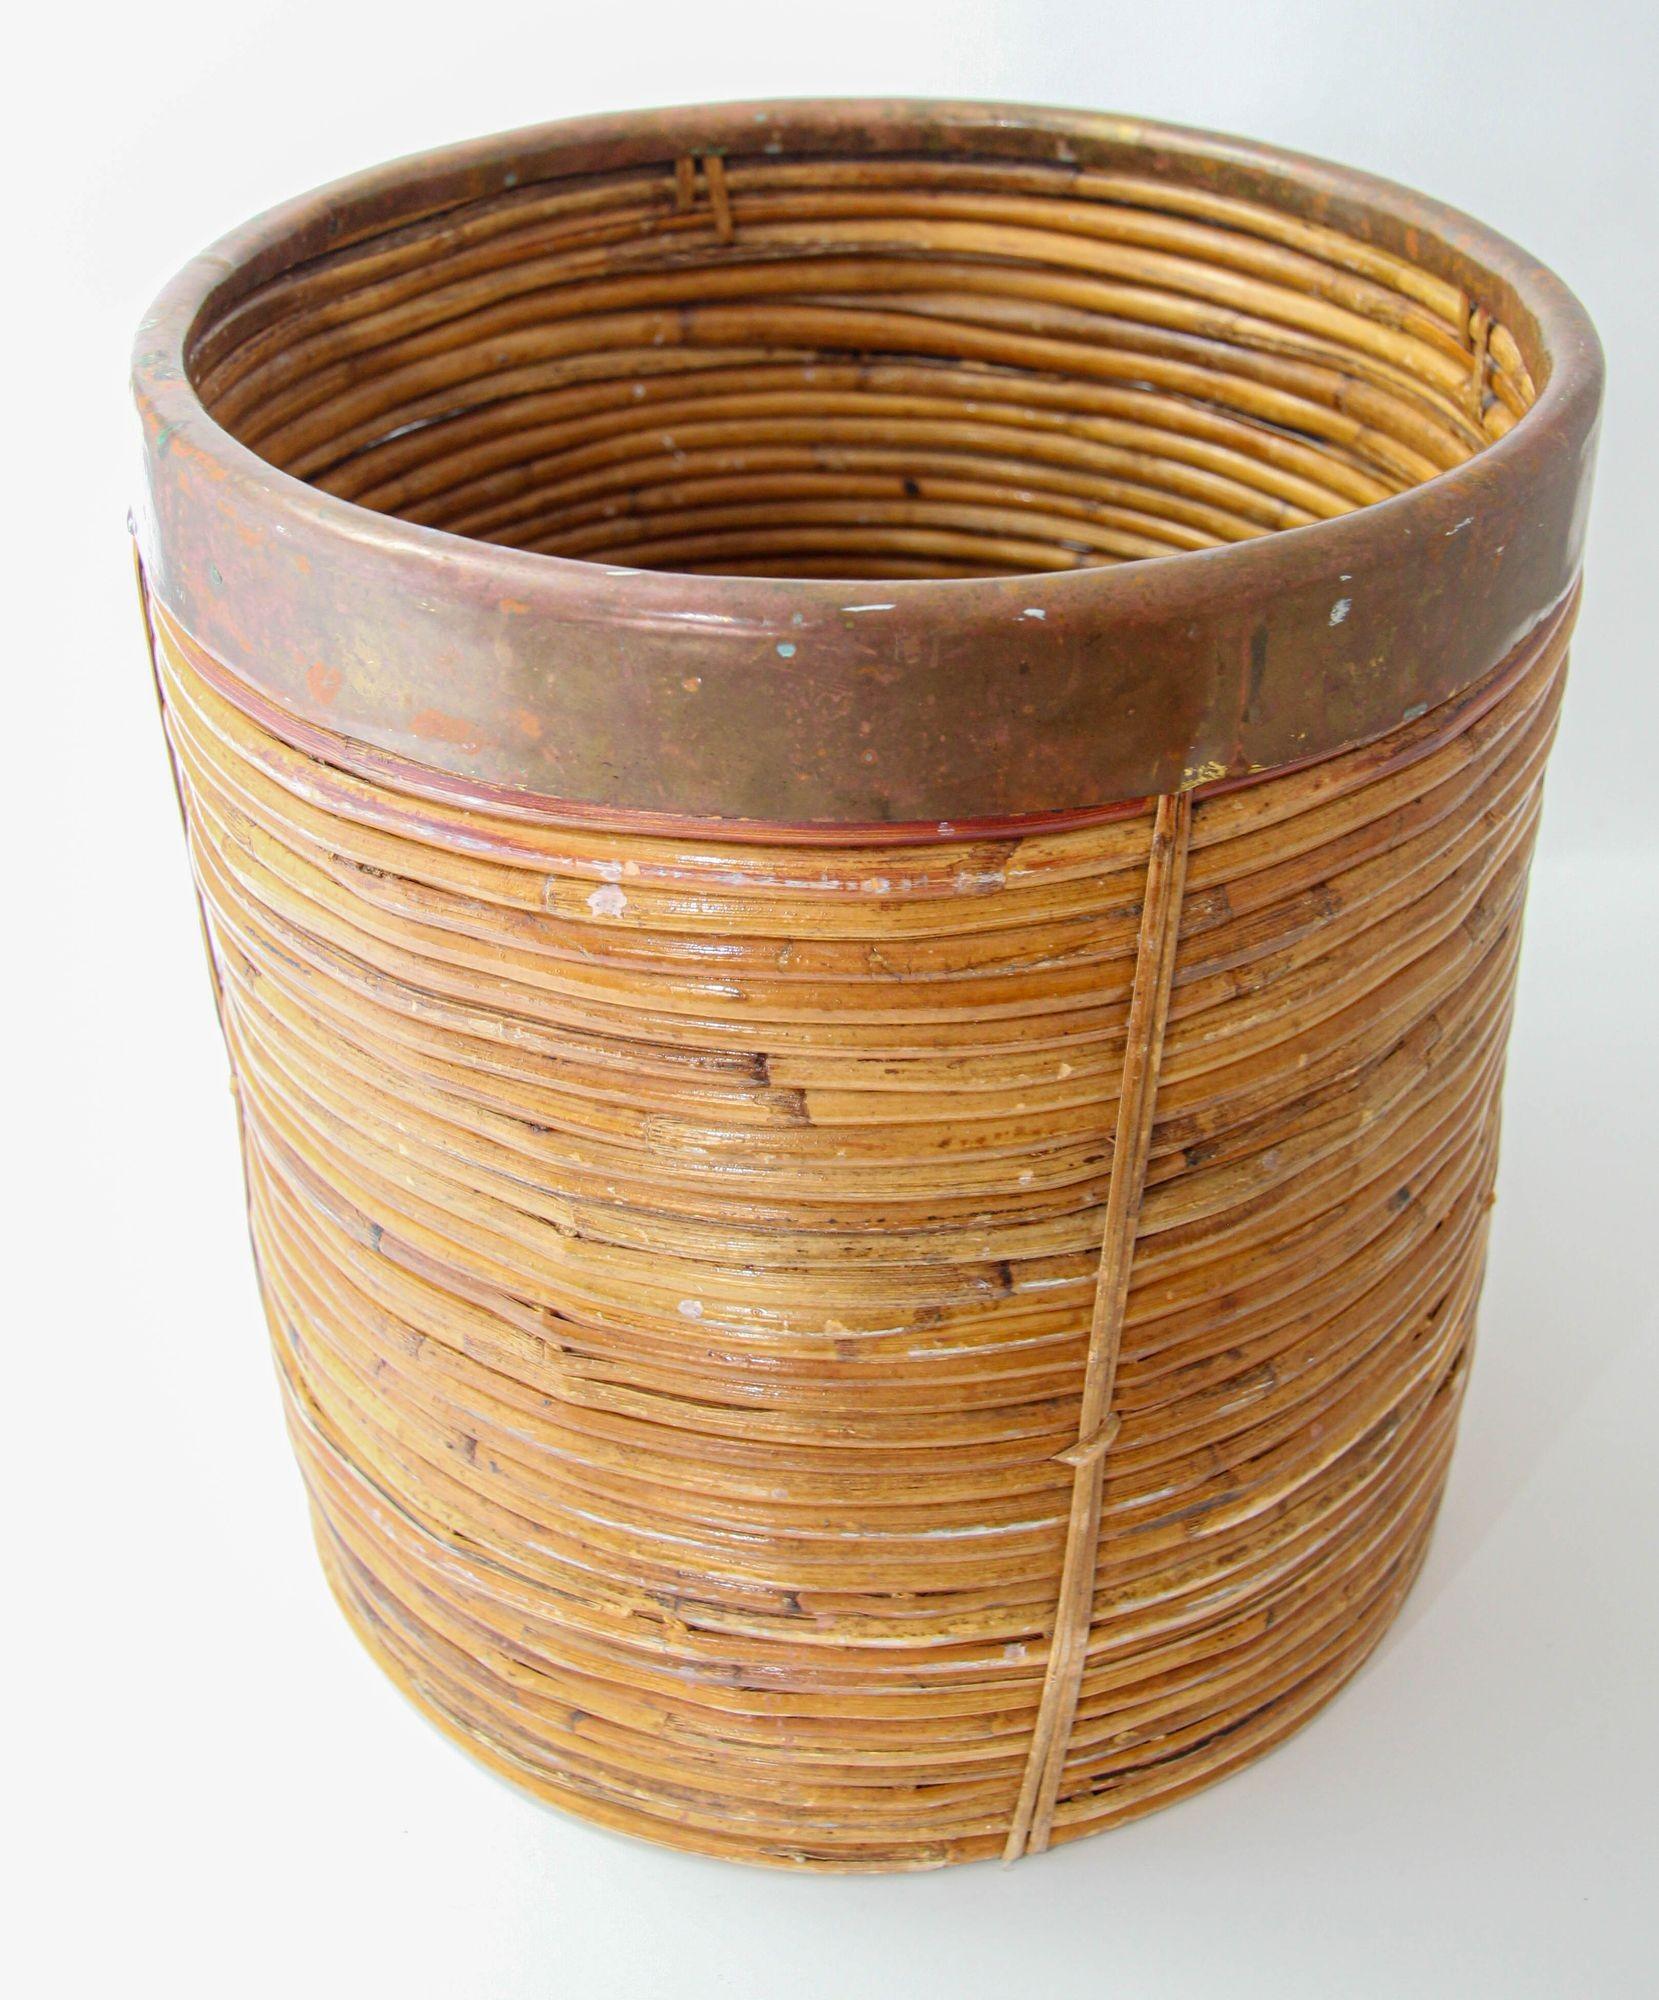 Very nice large round basket or planter in rattan bamboo with brass rim handmade in Italy in the 1970s.
Vintage Mid-Century Modern decorative handcrafted brass and rattan bamboo planter.
Round shape with gilded brass rim, inspired by Gabriella